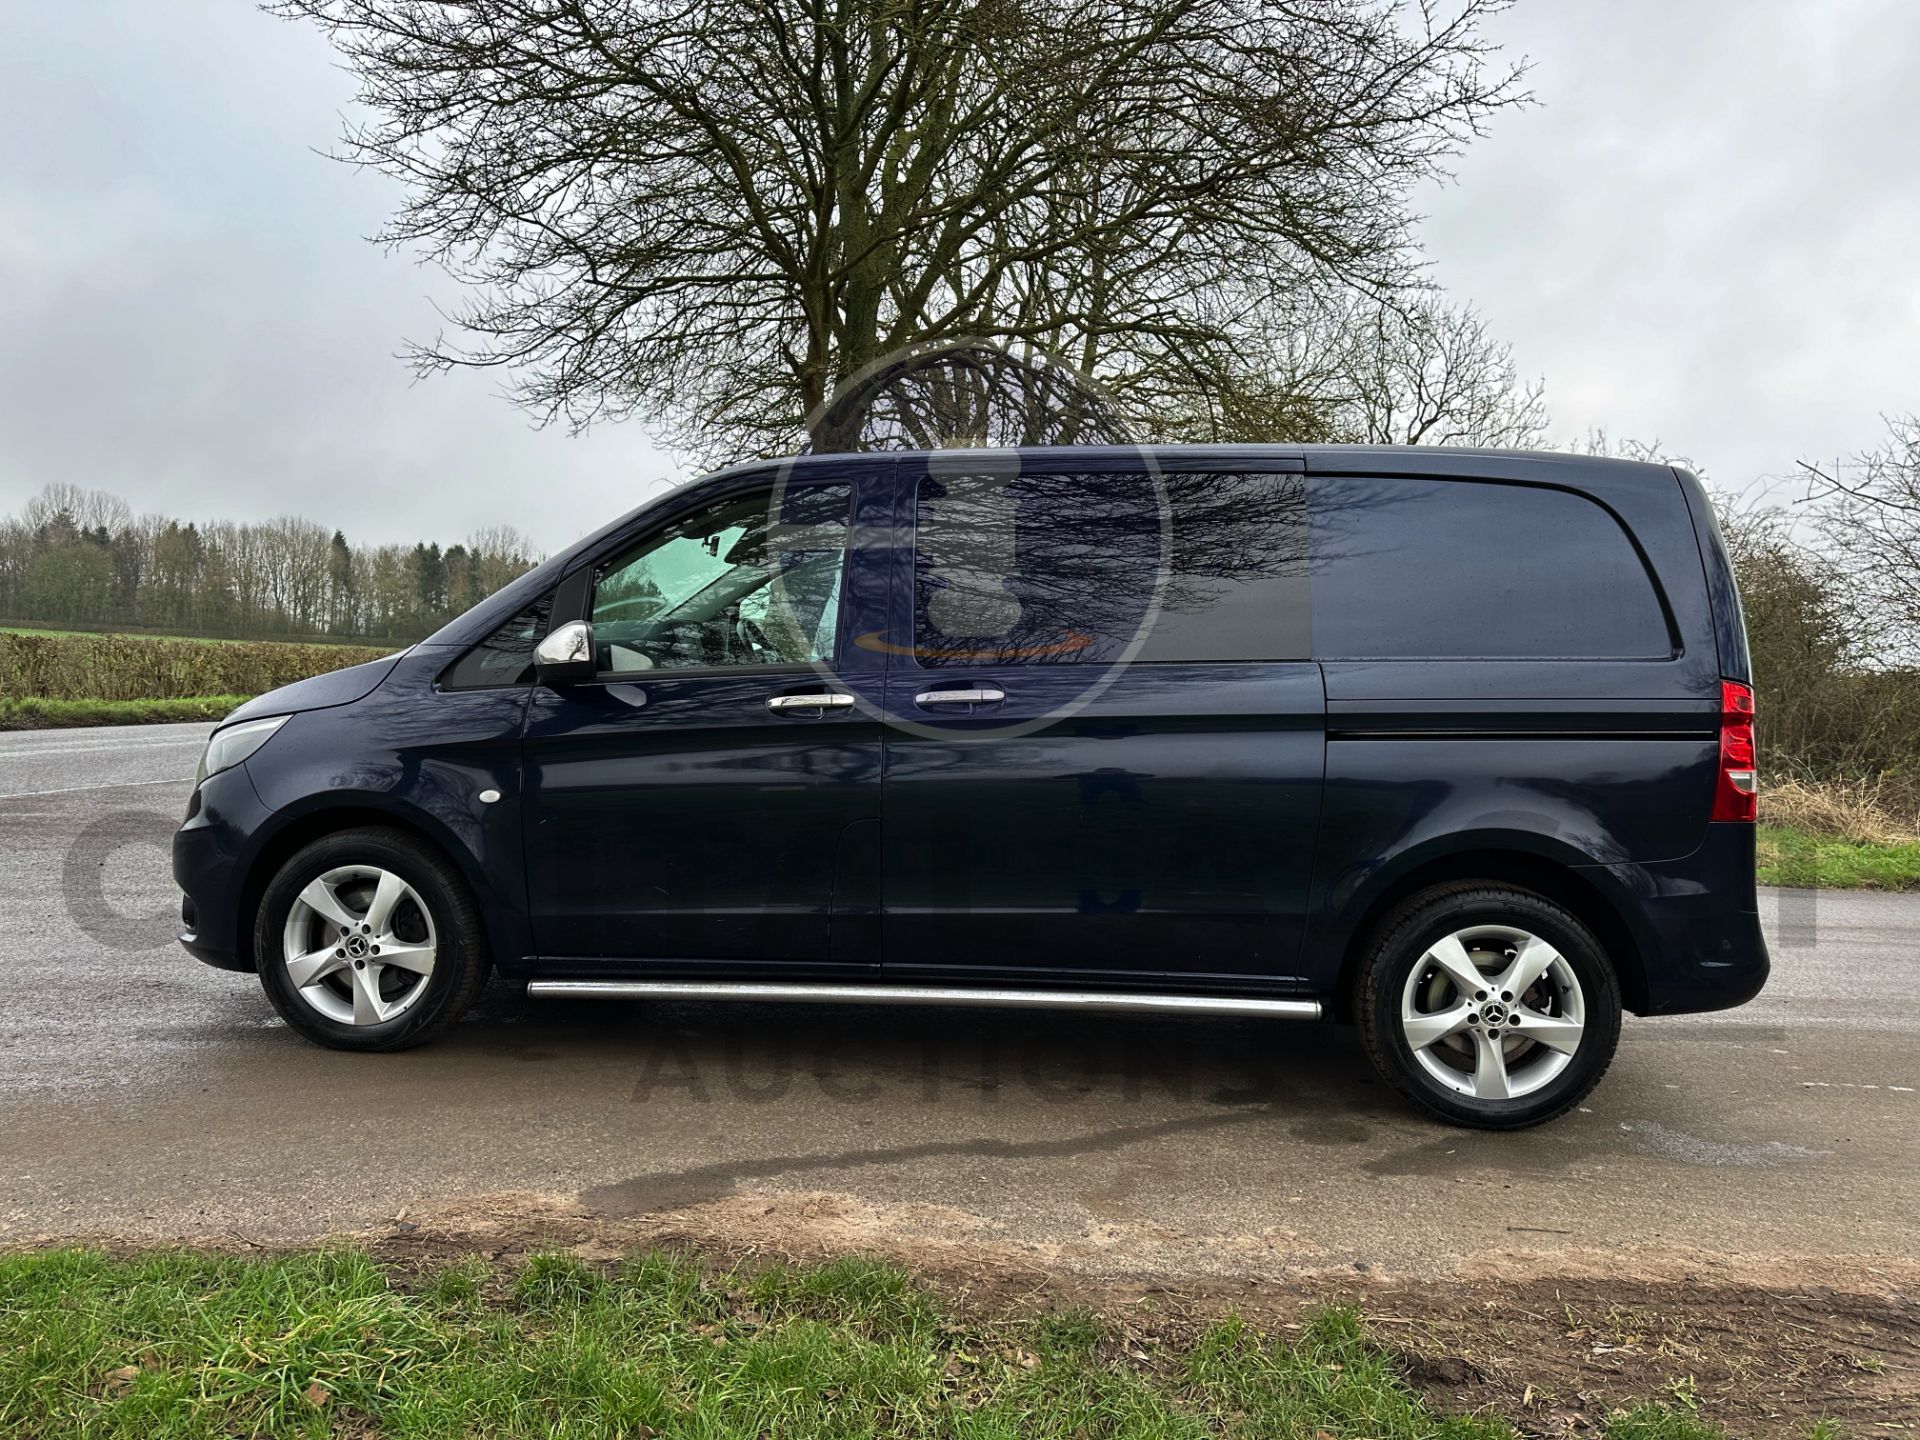 (ON SALE) MERCEDES-BENZ VITO 119 CDI AUTO *SWB - 5 SEATER DUALINER* (2019 - EURO 6) *SPORT EDITION* - Image 8 of 44